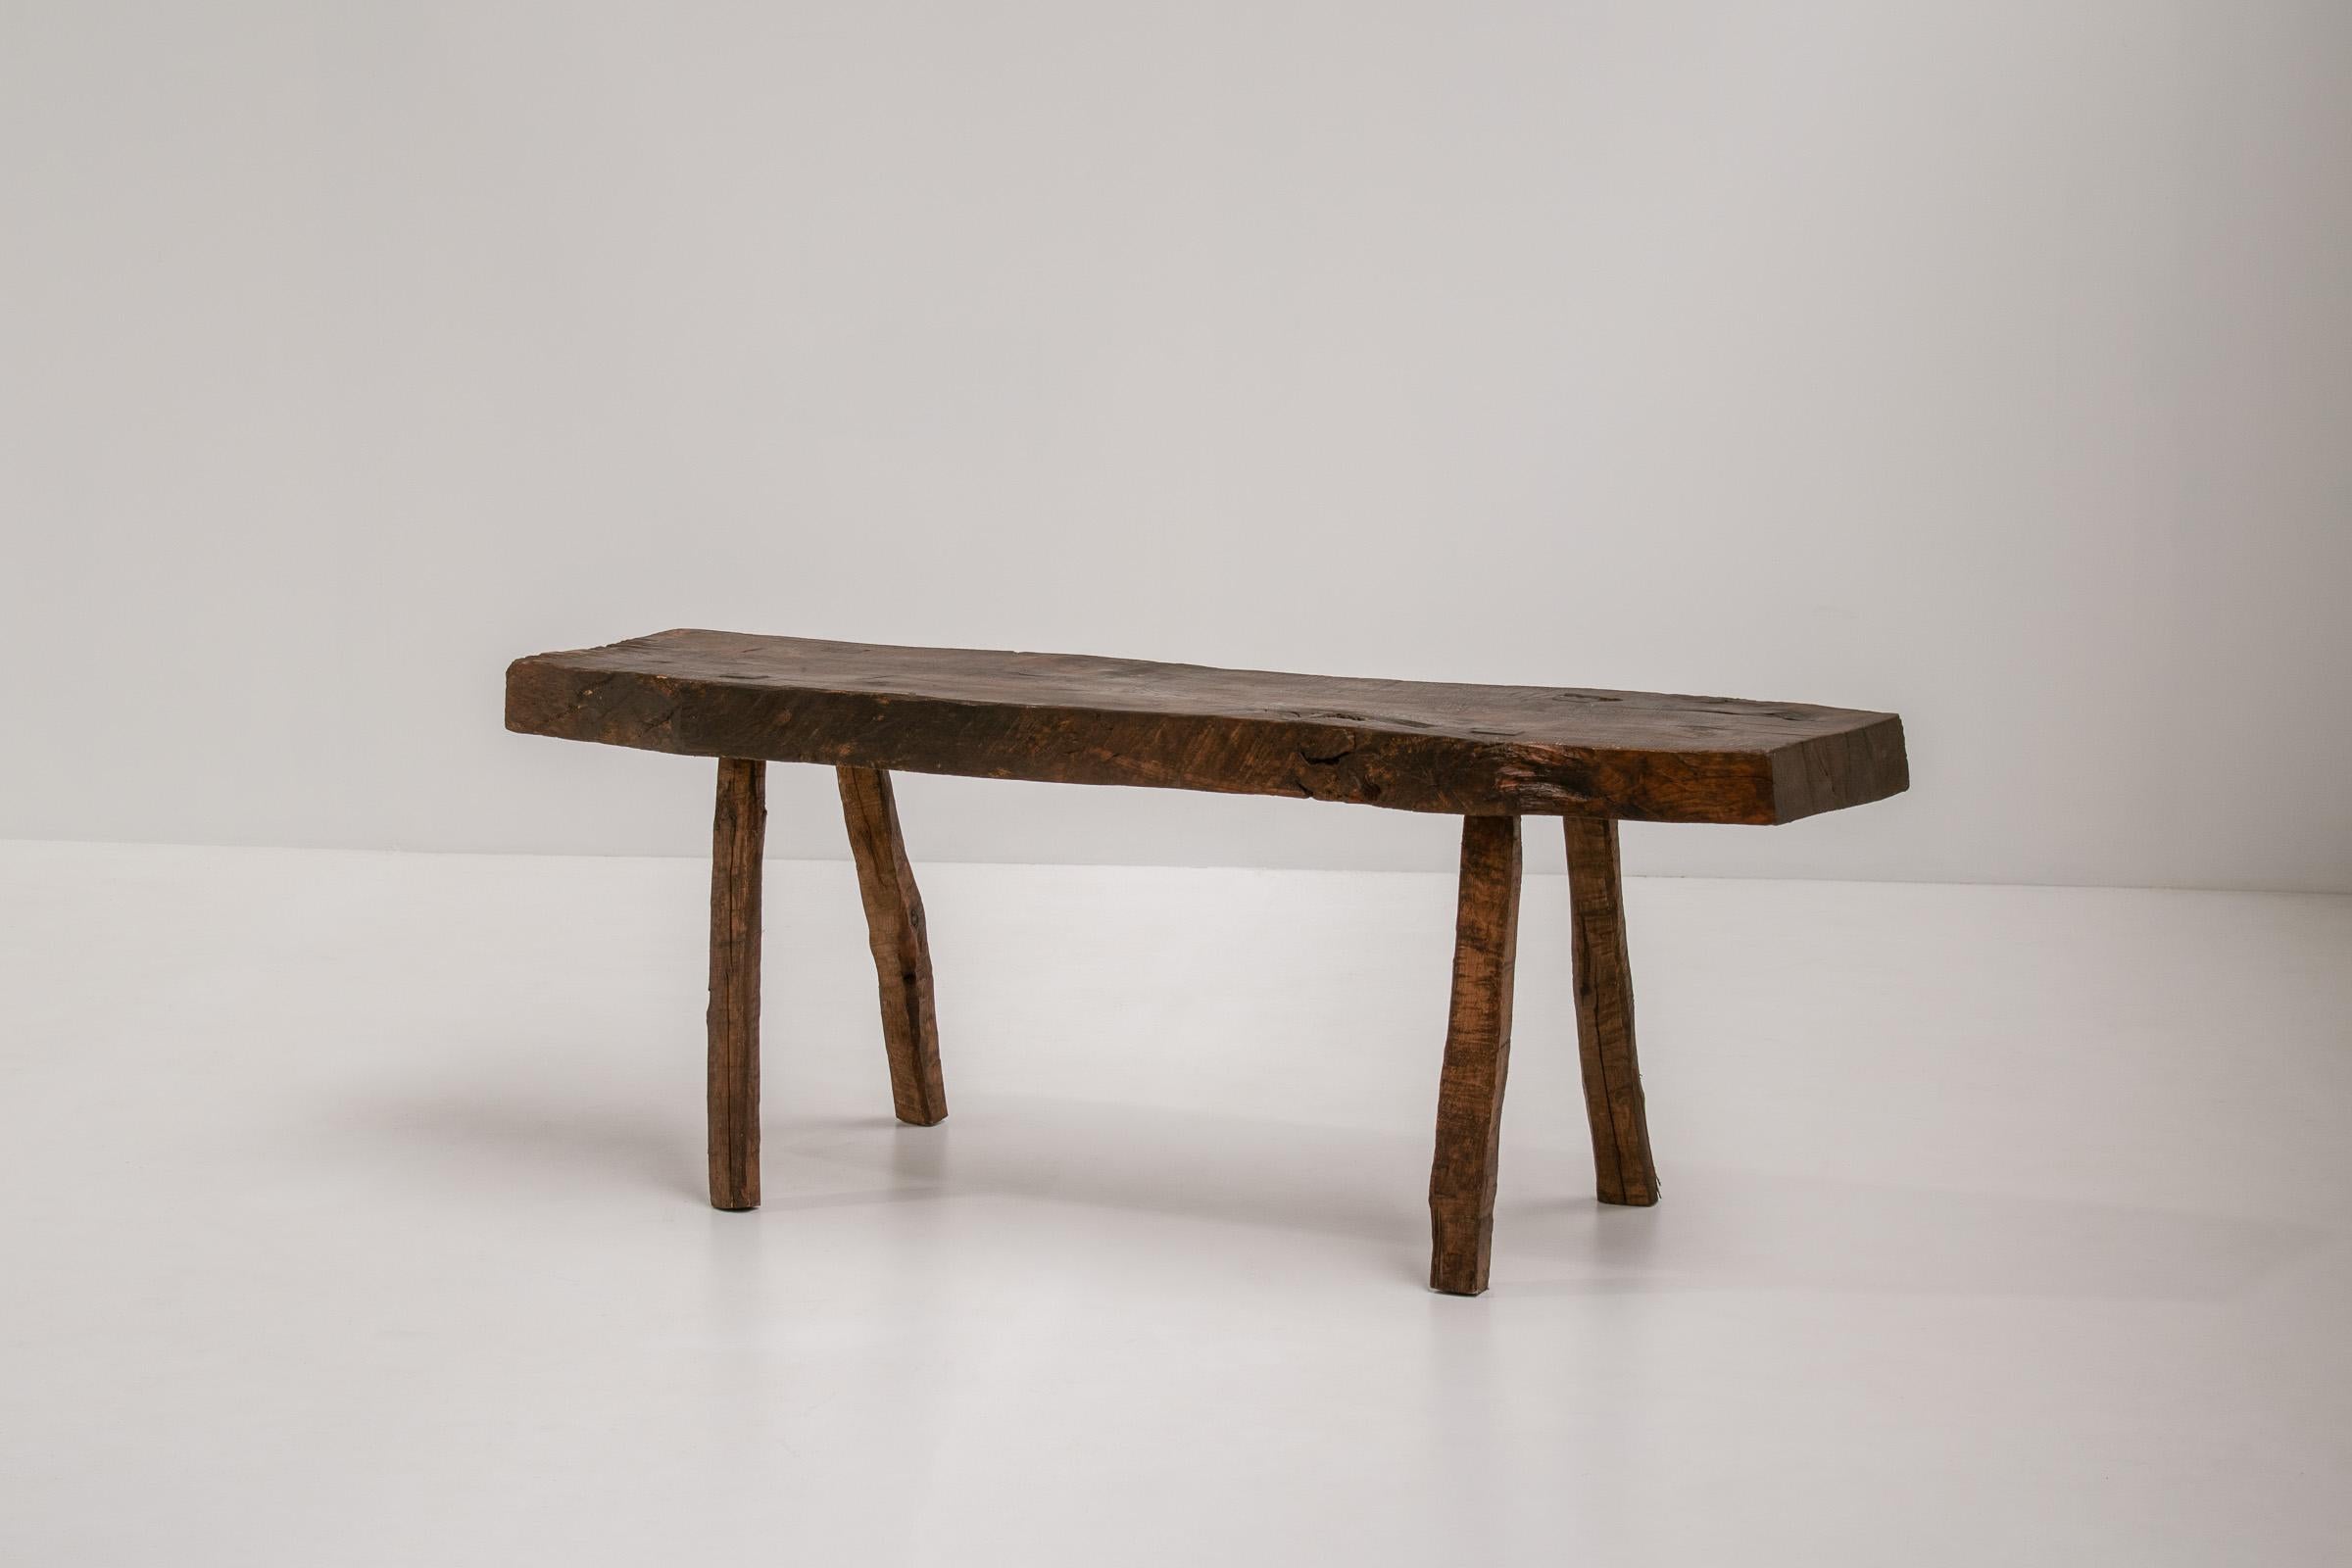 A stunning and unique beautifully weathered rustic wabi-sabi side table or bench. Sourced from the picturesque landscapes of Southern France. Its natural patina and textured surface create a harmonious balance between raw simplicity and refined